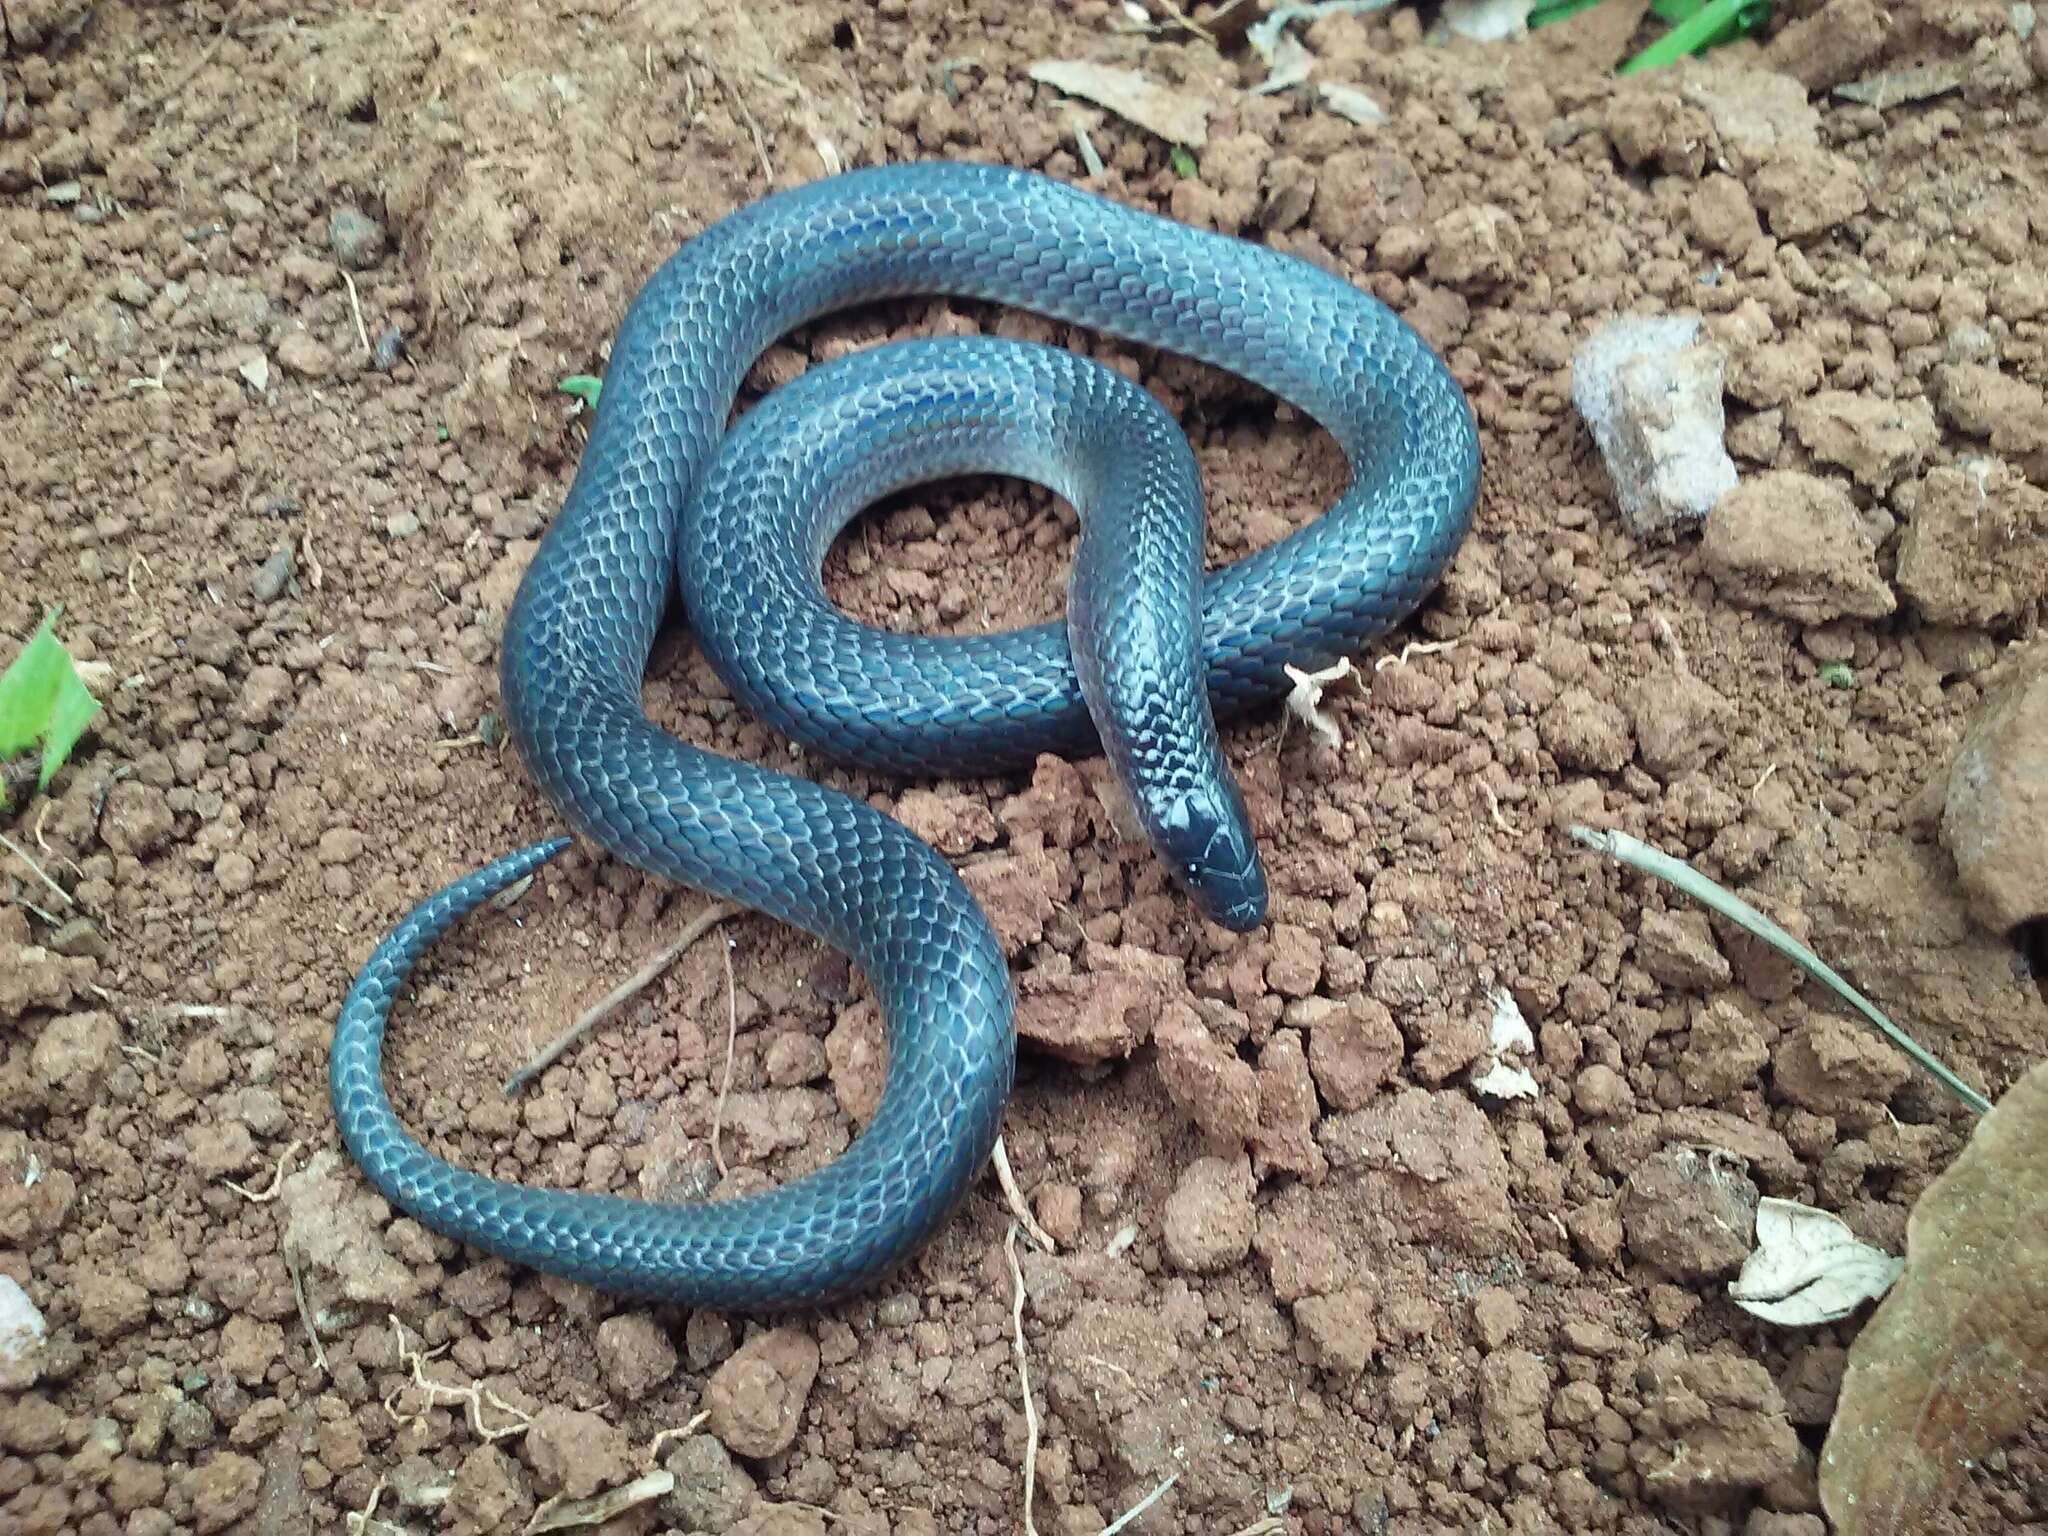 Image of Peters' Earth Snake